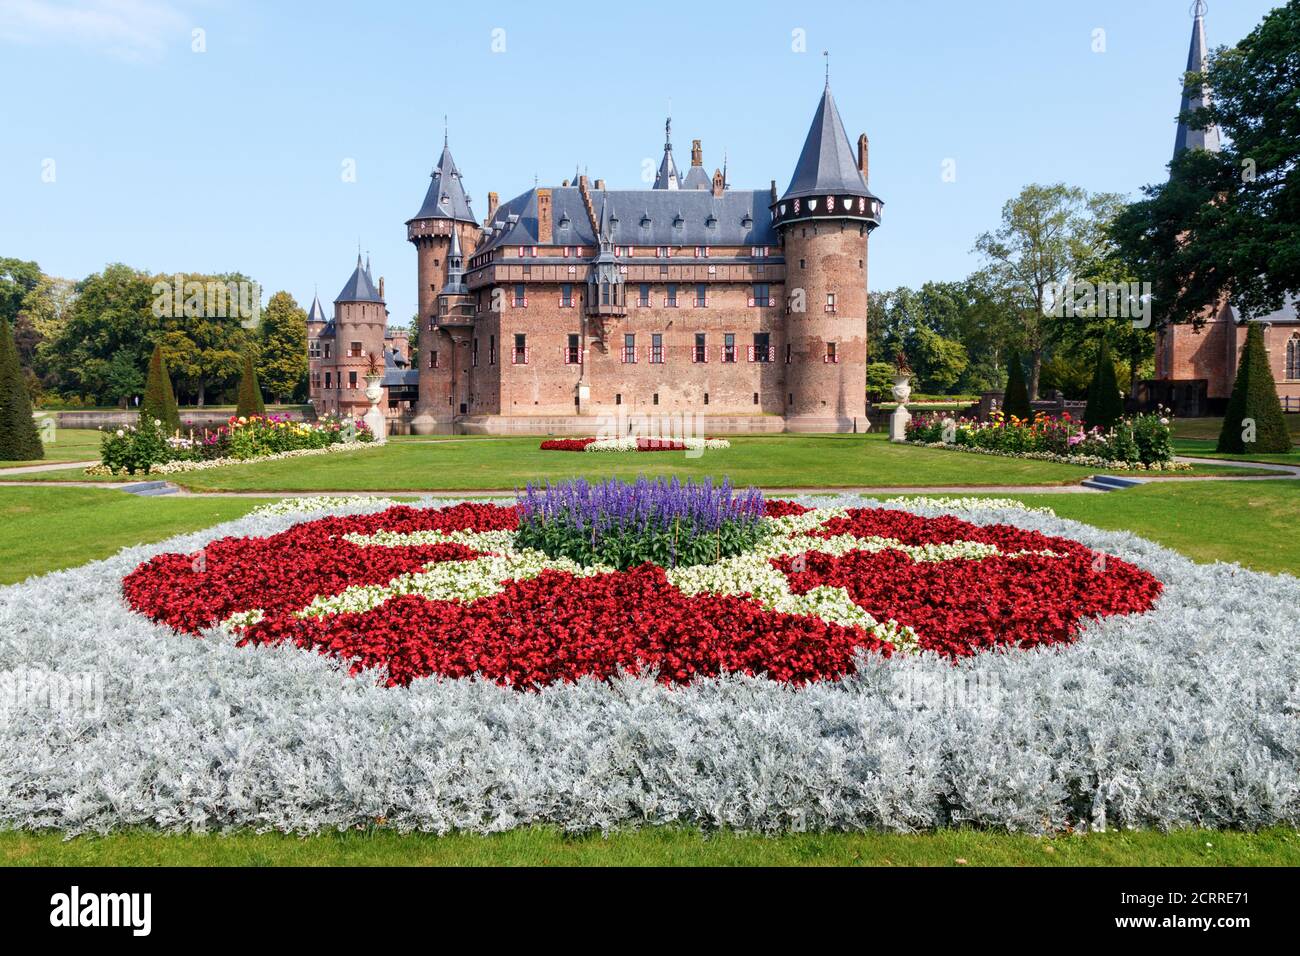 Haarzuilens. Castle the Haar and the surrounding gardens with trees and flowers on a sunny day. Utrecht, The Netherlands. Stock Photo